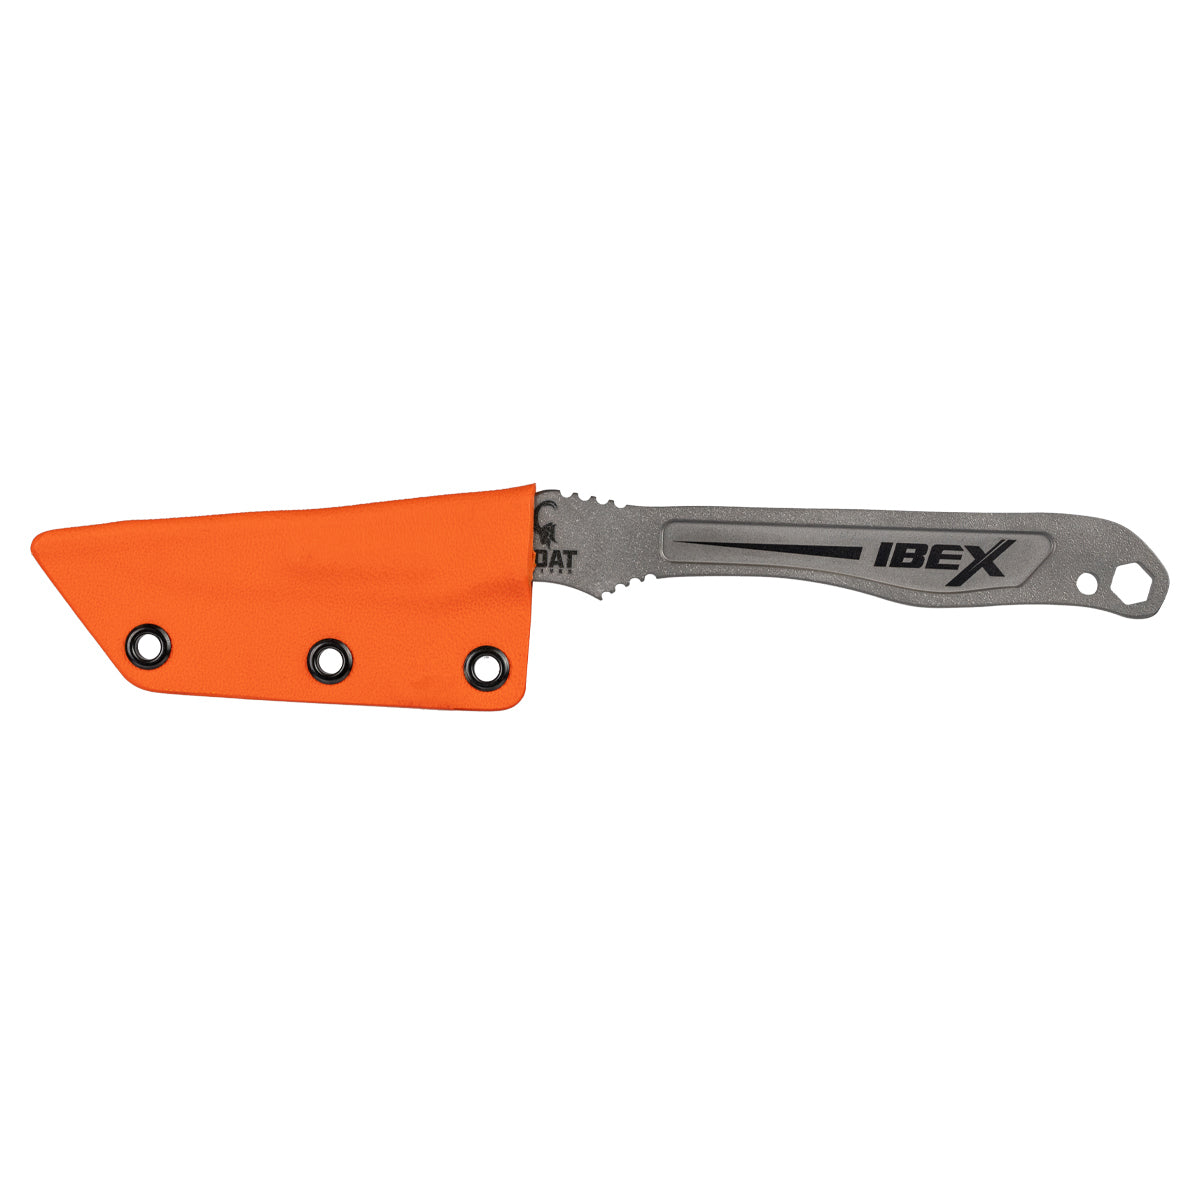 Goat Knives Ibex Mini Replaceable Blade Knife